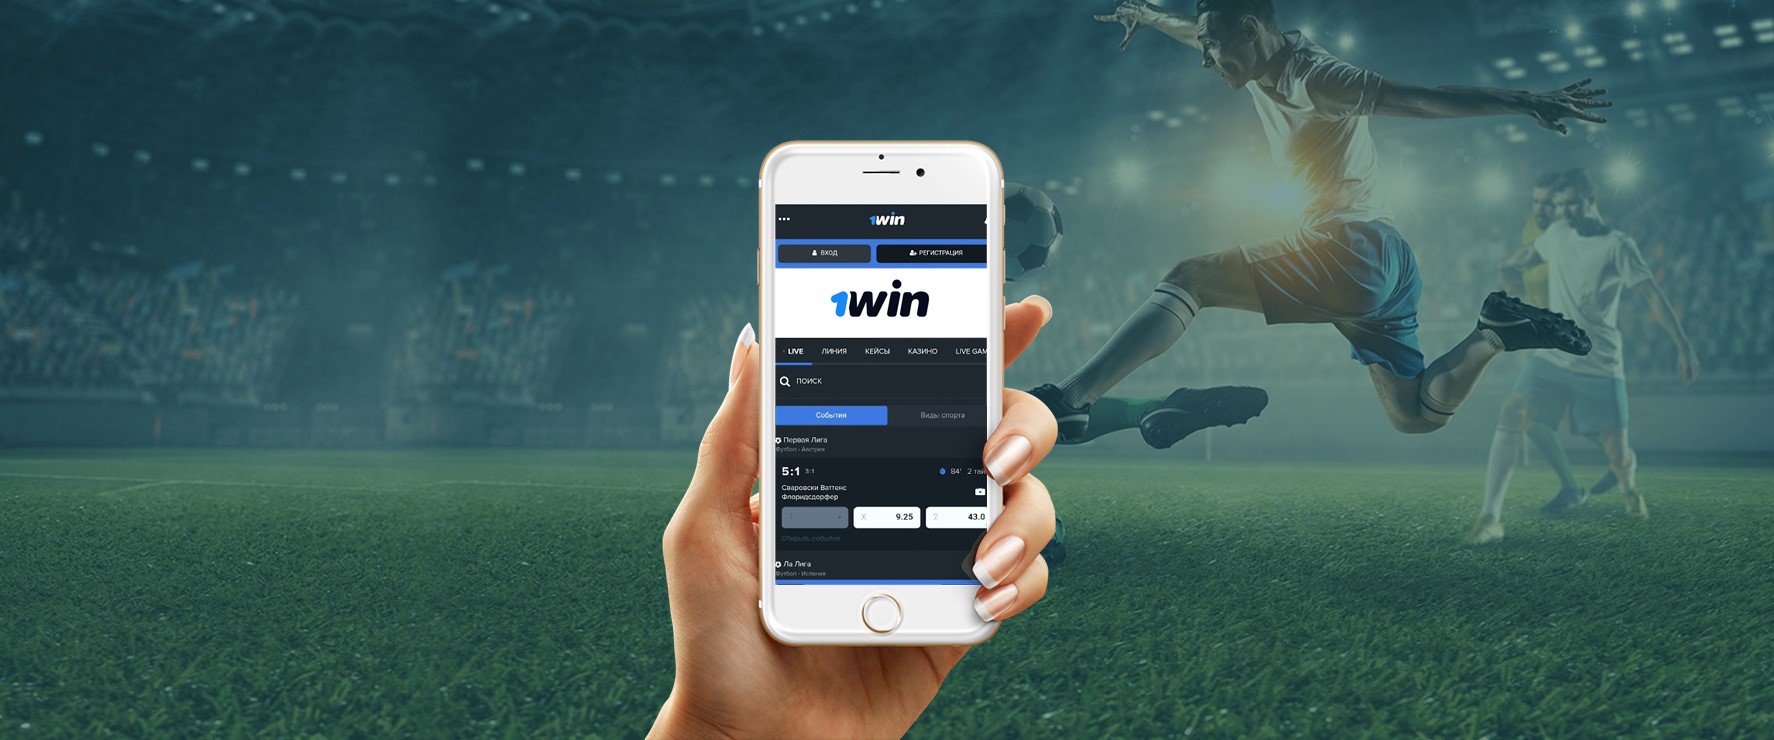 5 1win bet app Issues And How To Solve Them